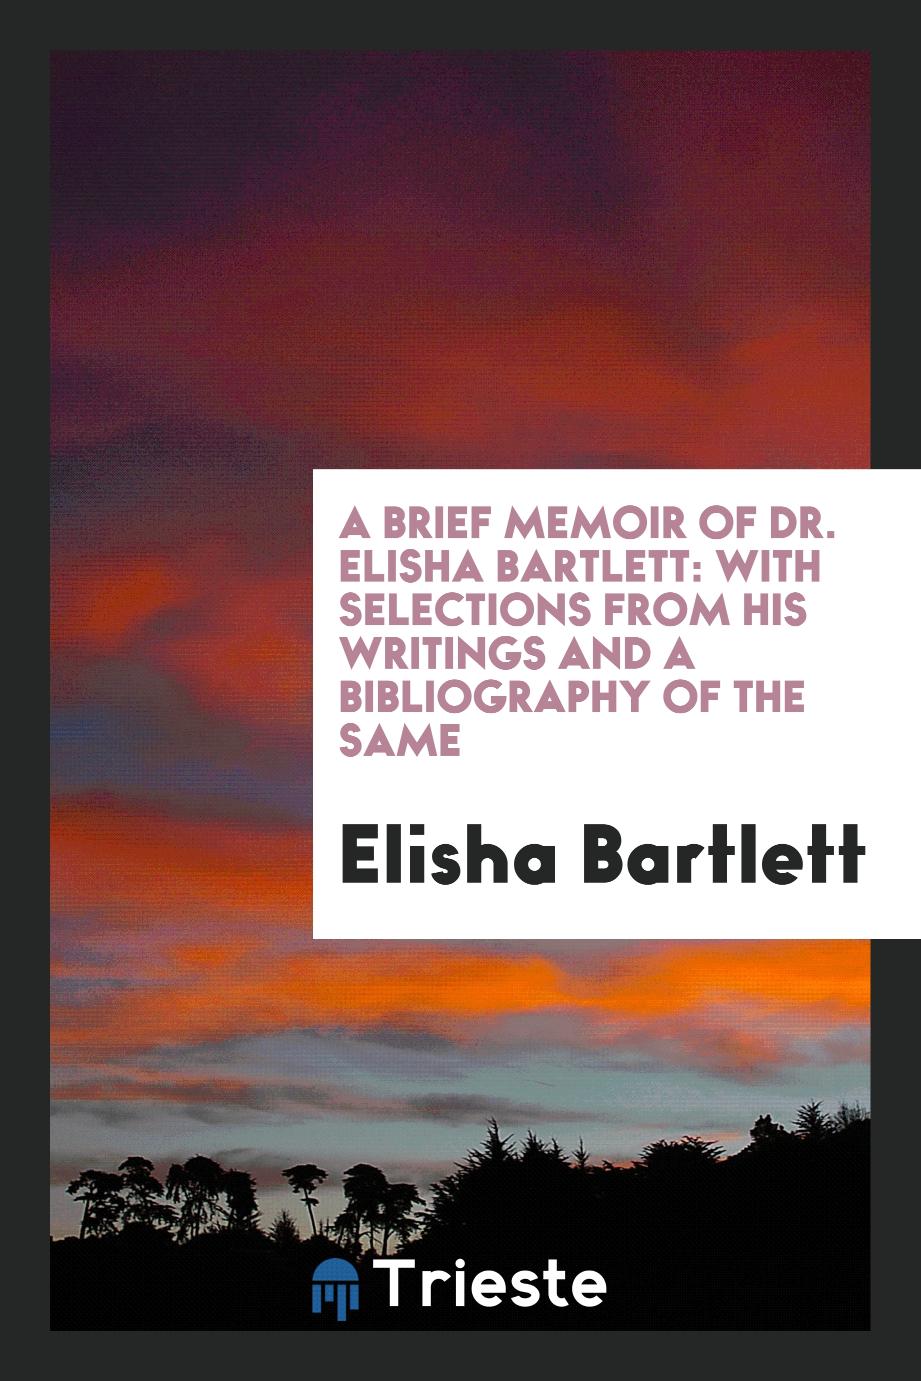 A Brief Memoir of Dr. Elisha Bartlett: With Selections from His Writings and a Bibliography of the same